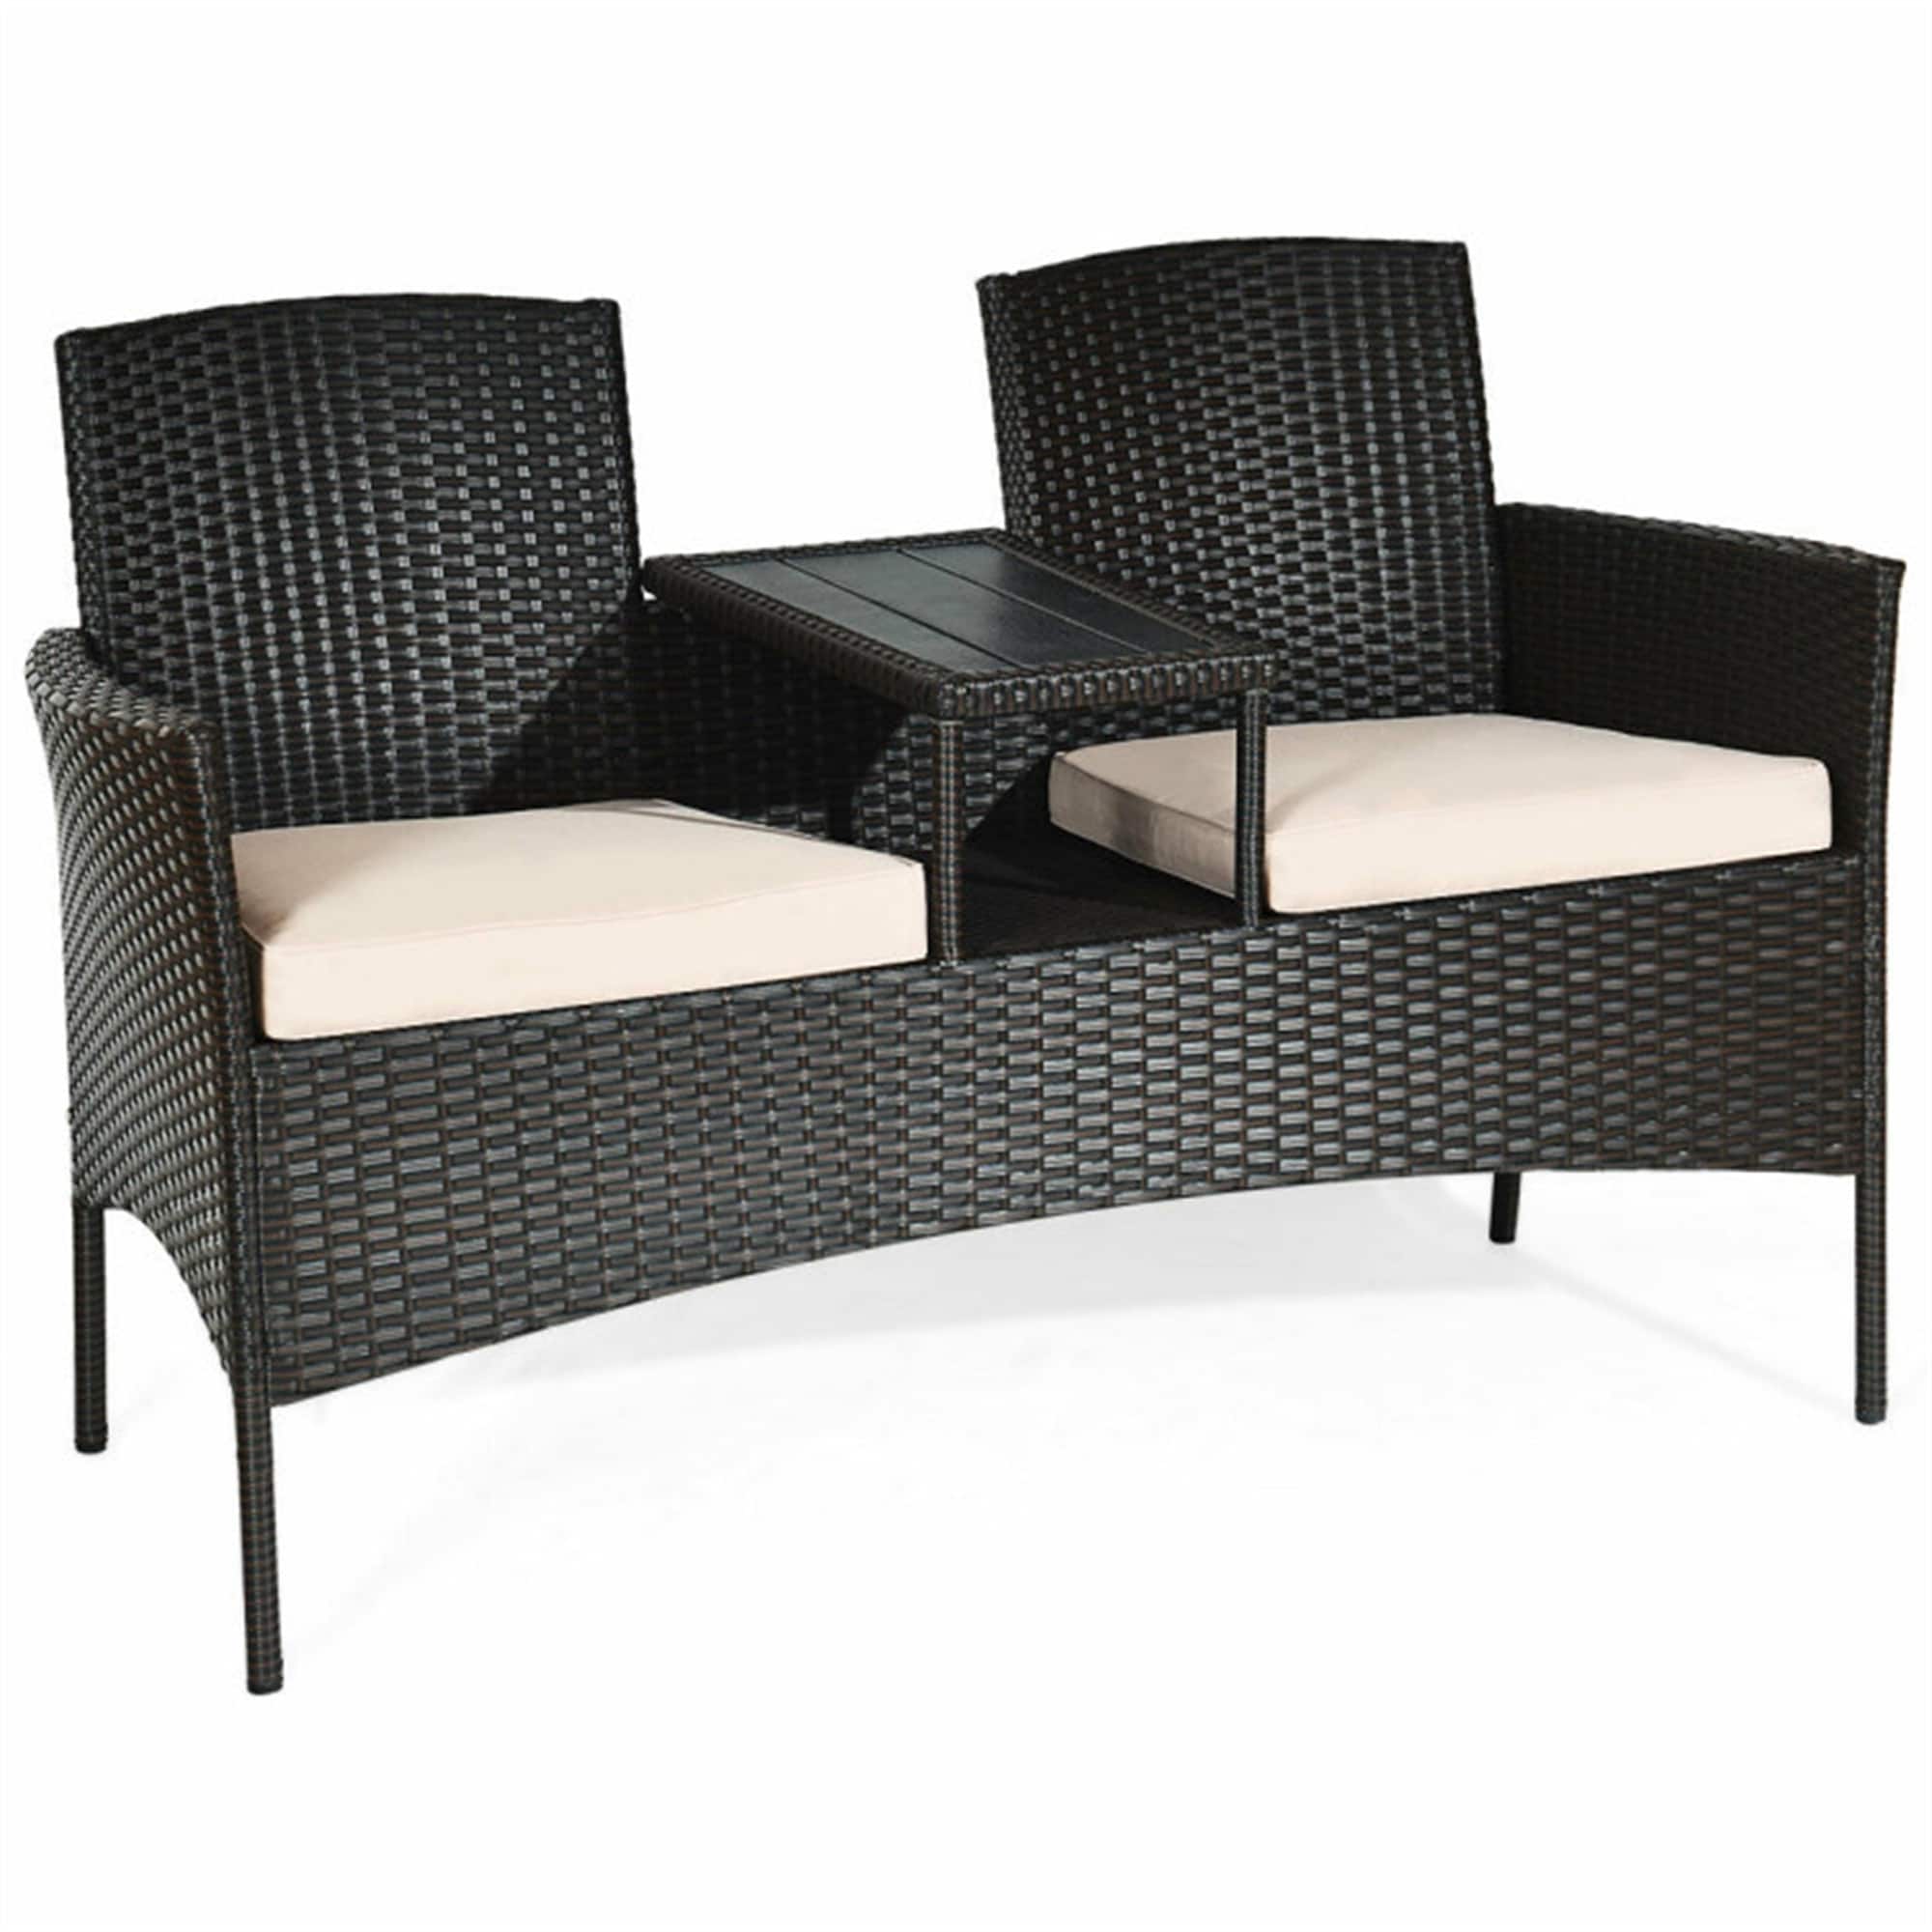 Rattan Double Seat Patio Conversation Set Loveseat Sofa With Cushions